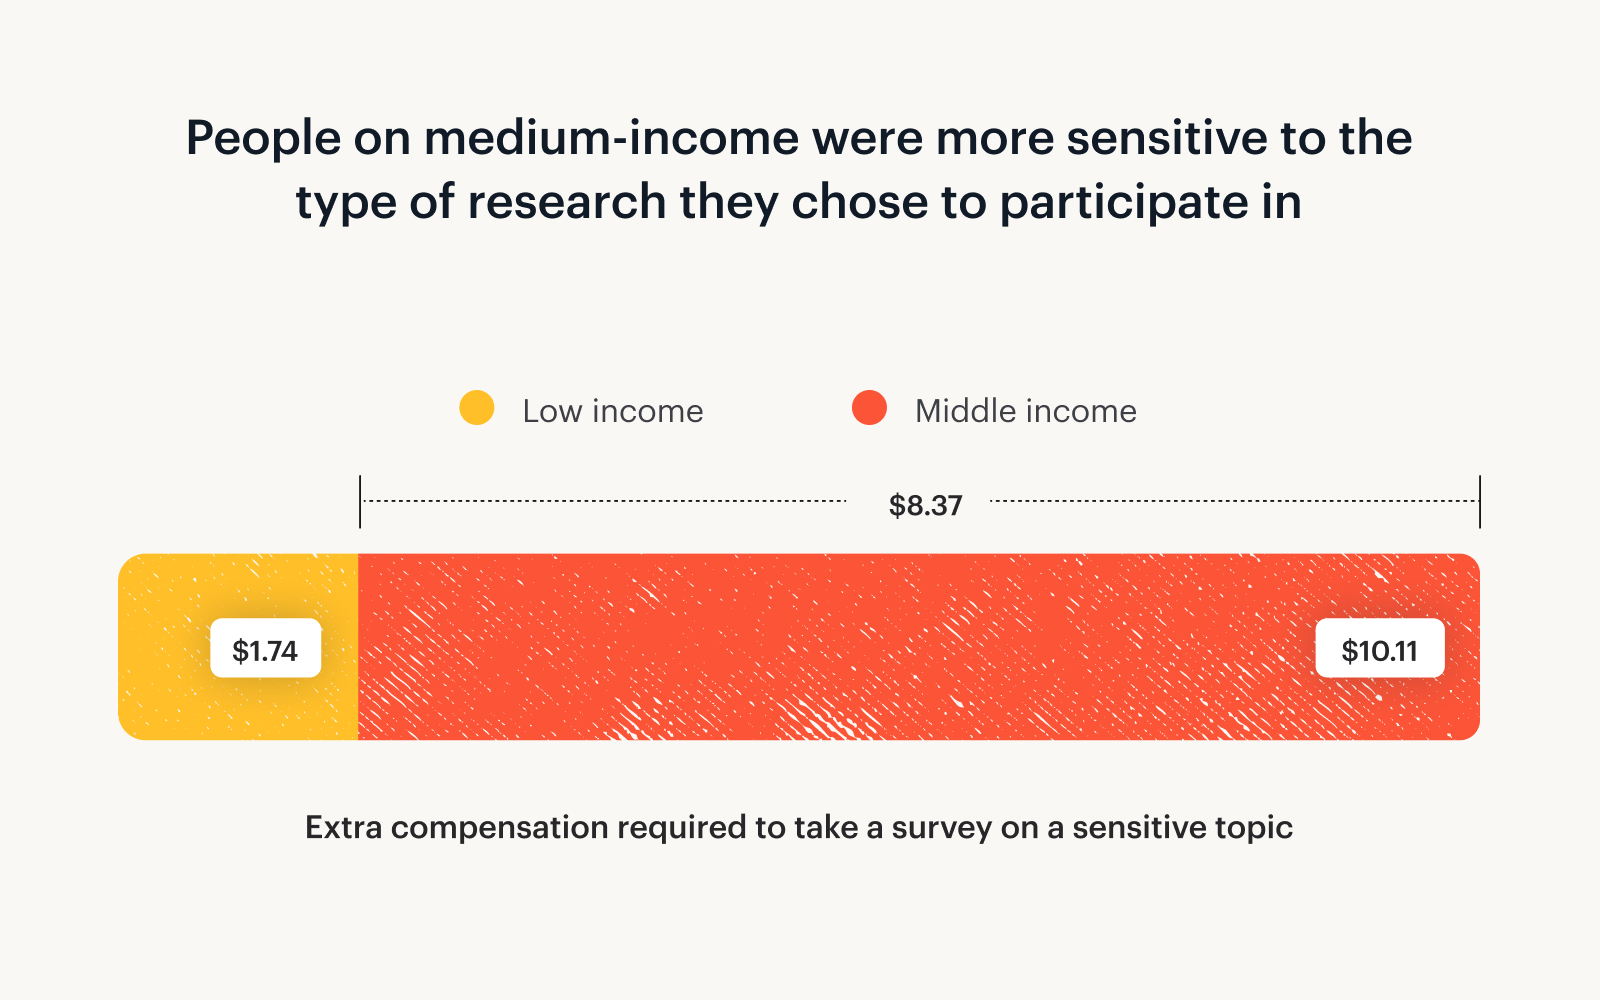 A graph showing that medium-income participants are more sensitive to the type of research they choose to participate in.